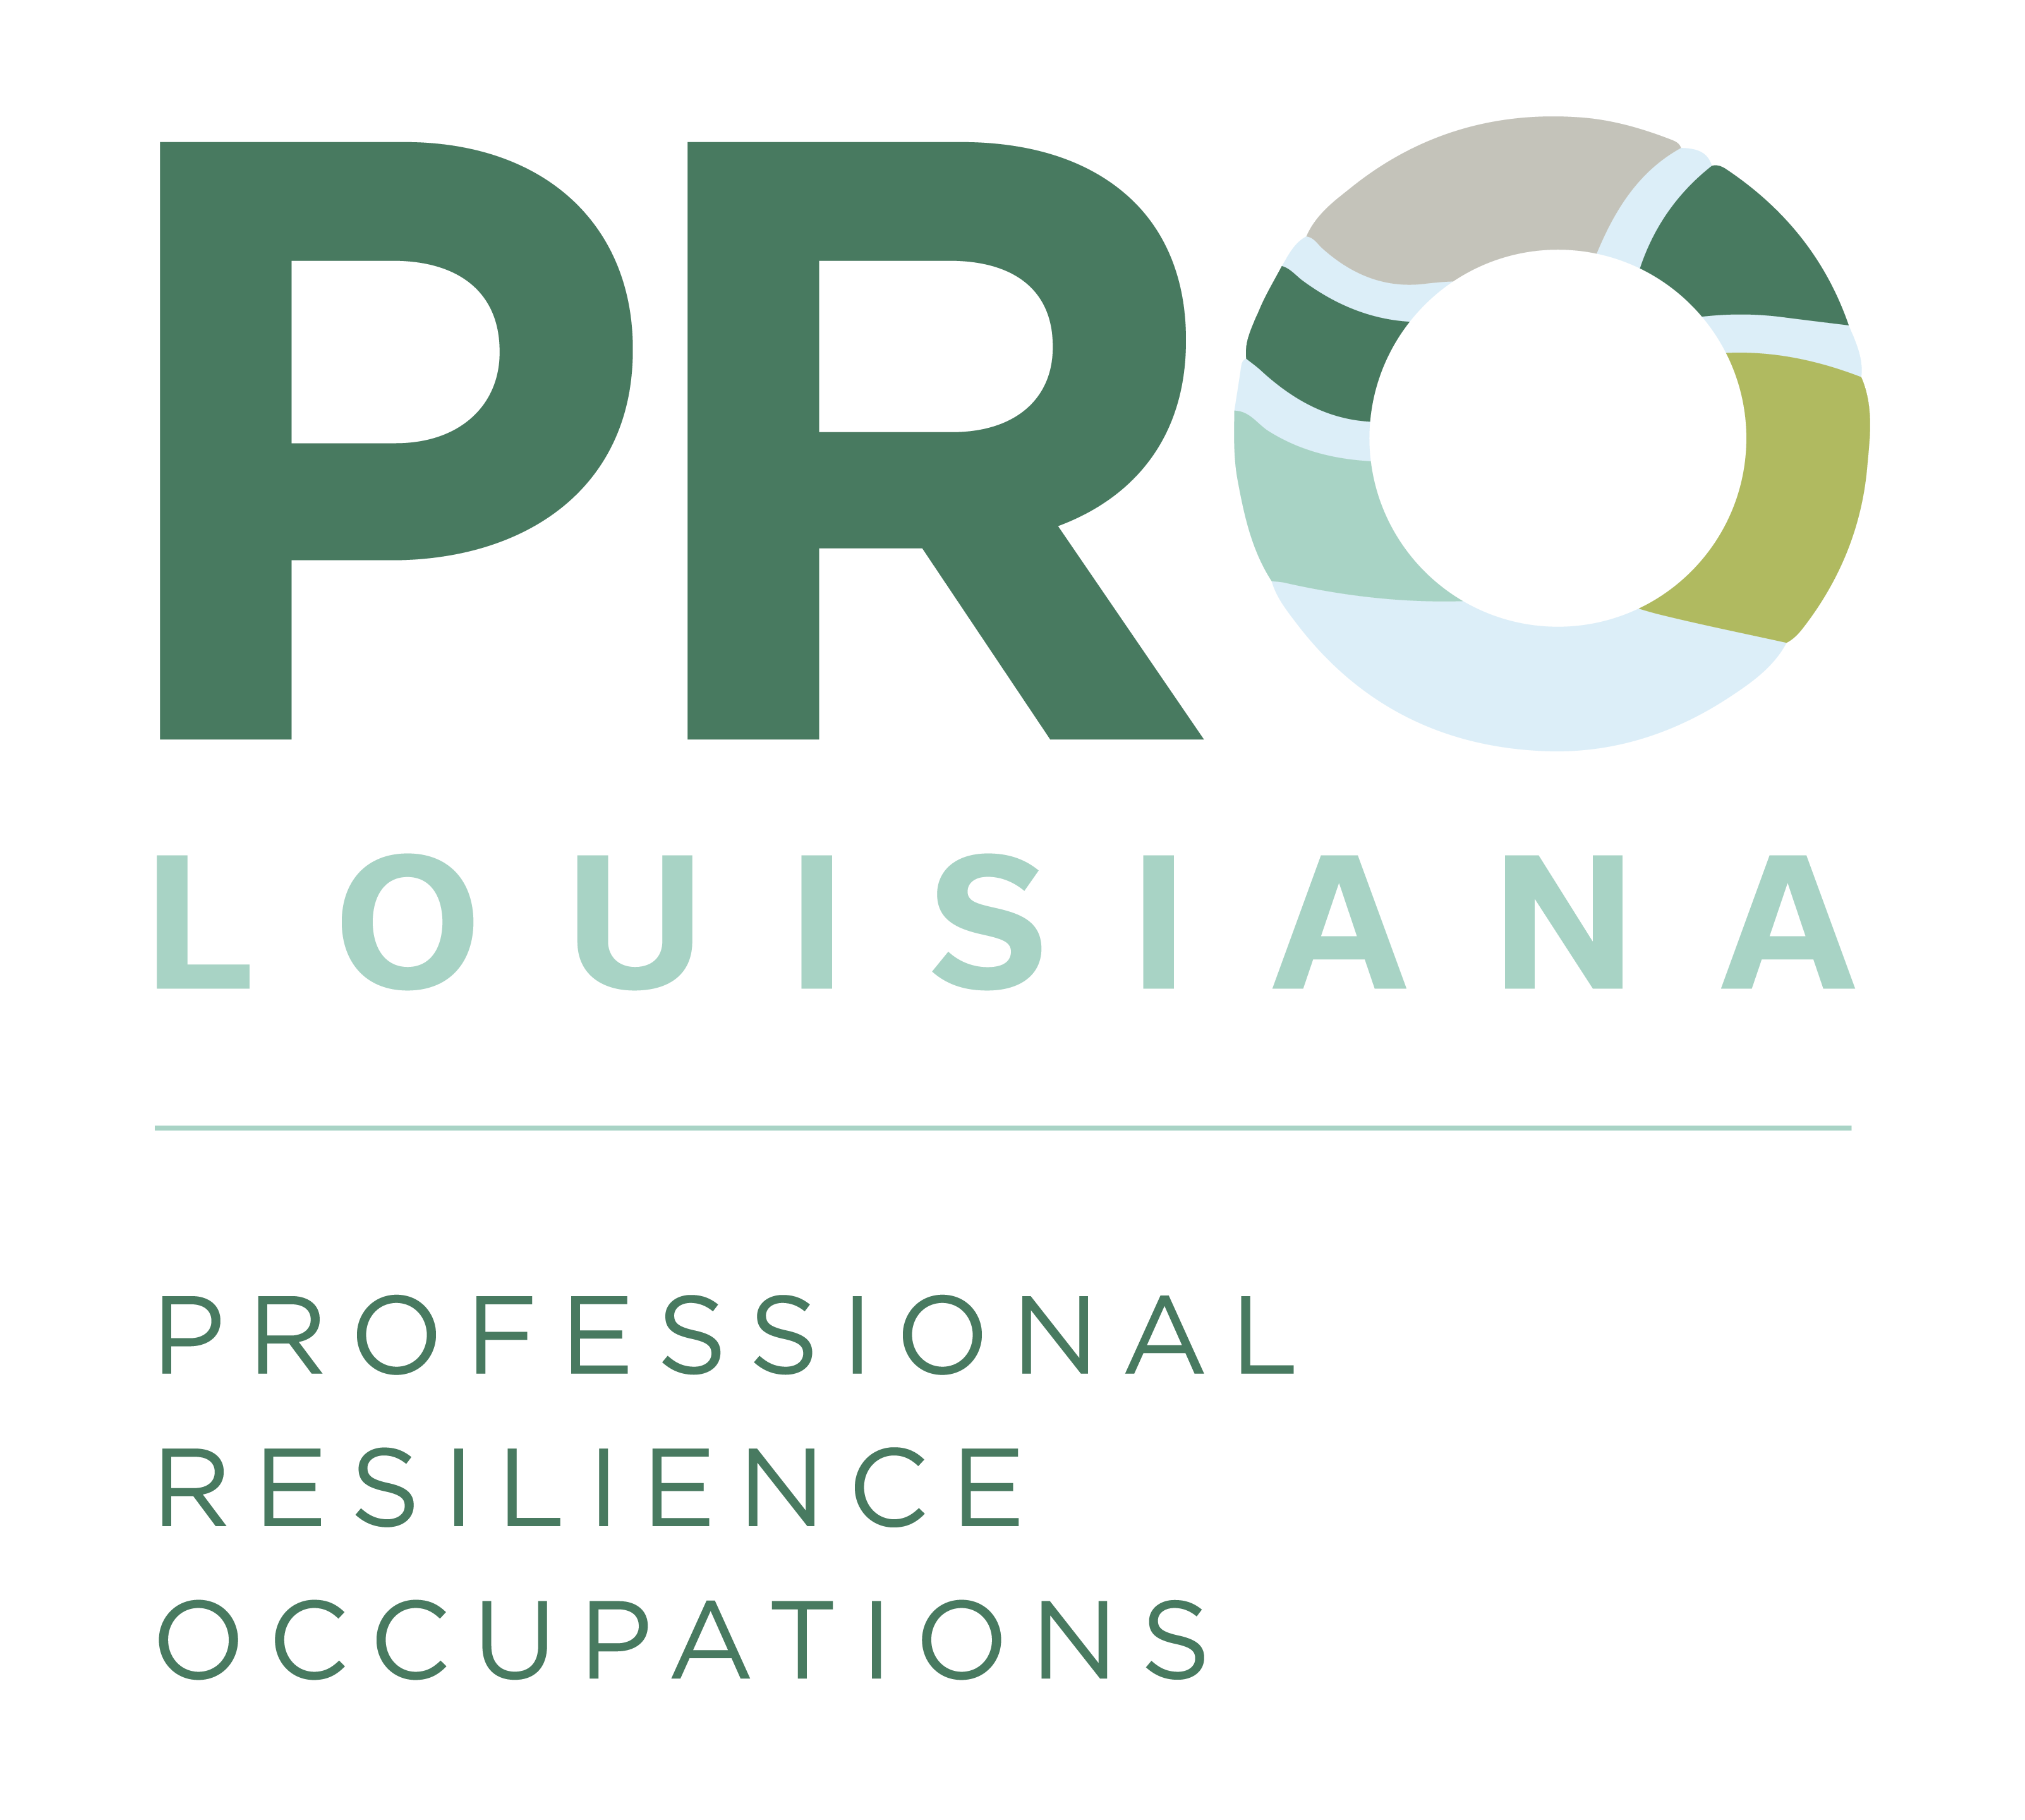 PROFESSIONAL RESILIENCE OCCUPATIONS